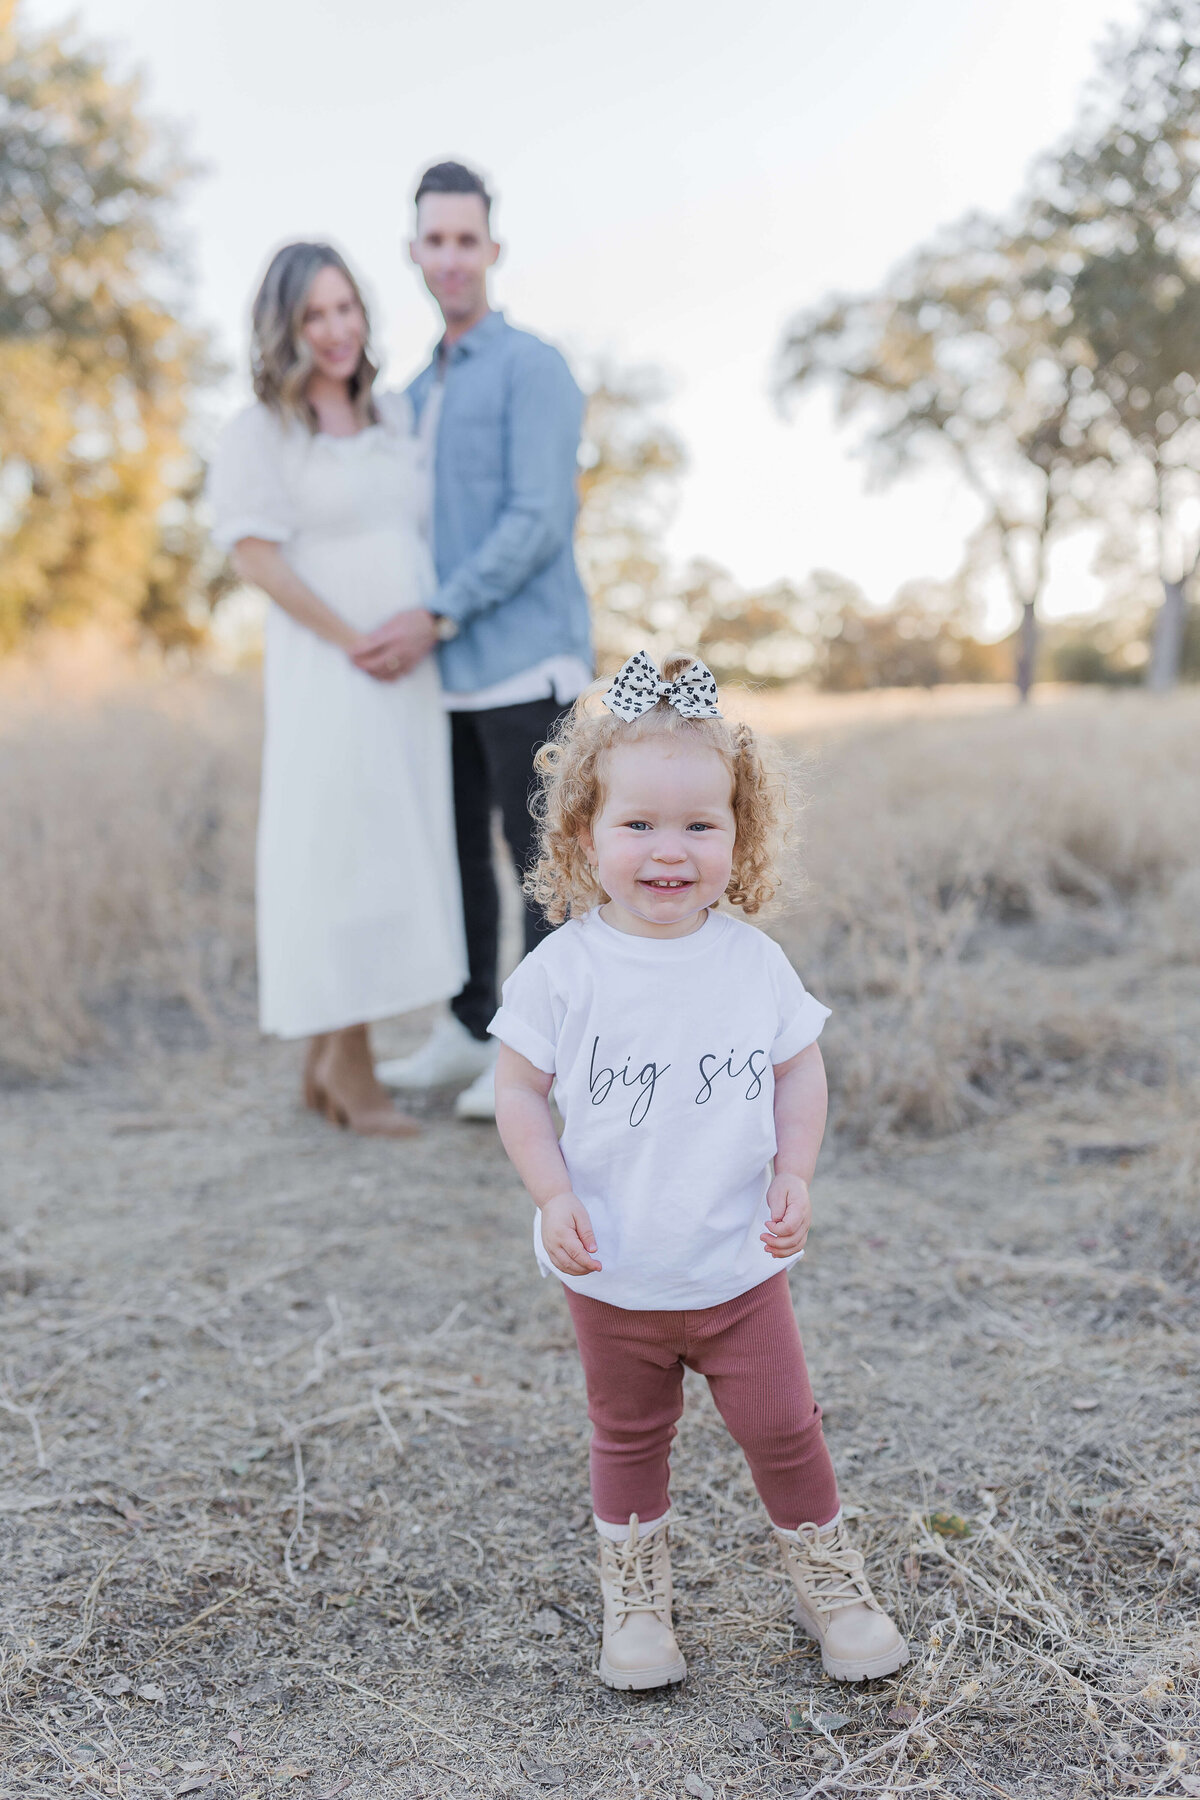 couple standing in the back while toddler is in the front wearing big sister t-shirt  during pregnancy announcement photos